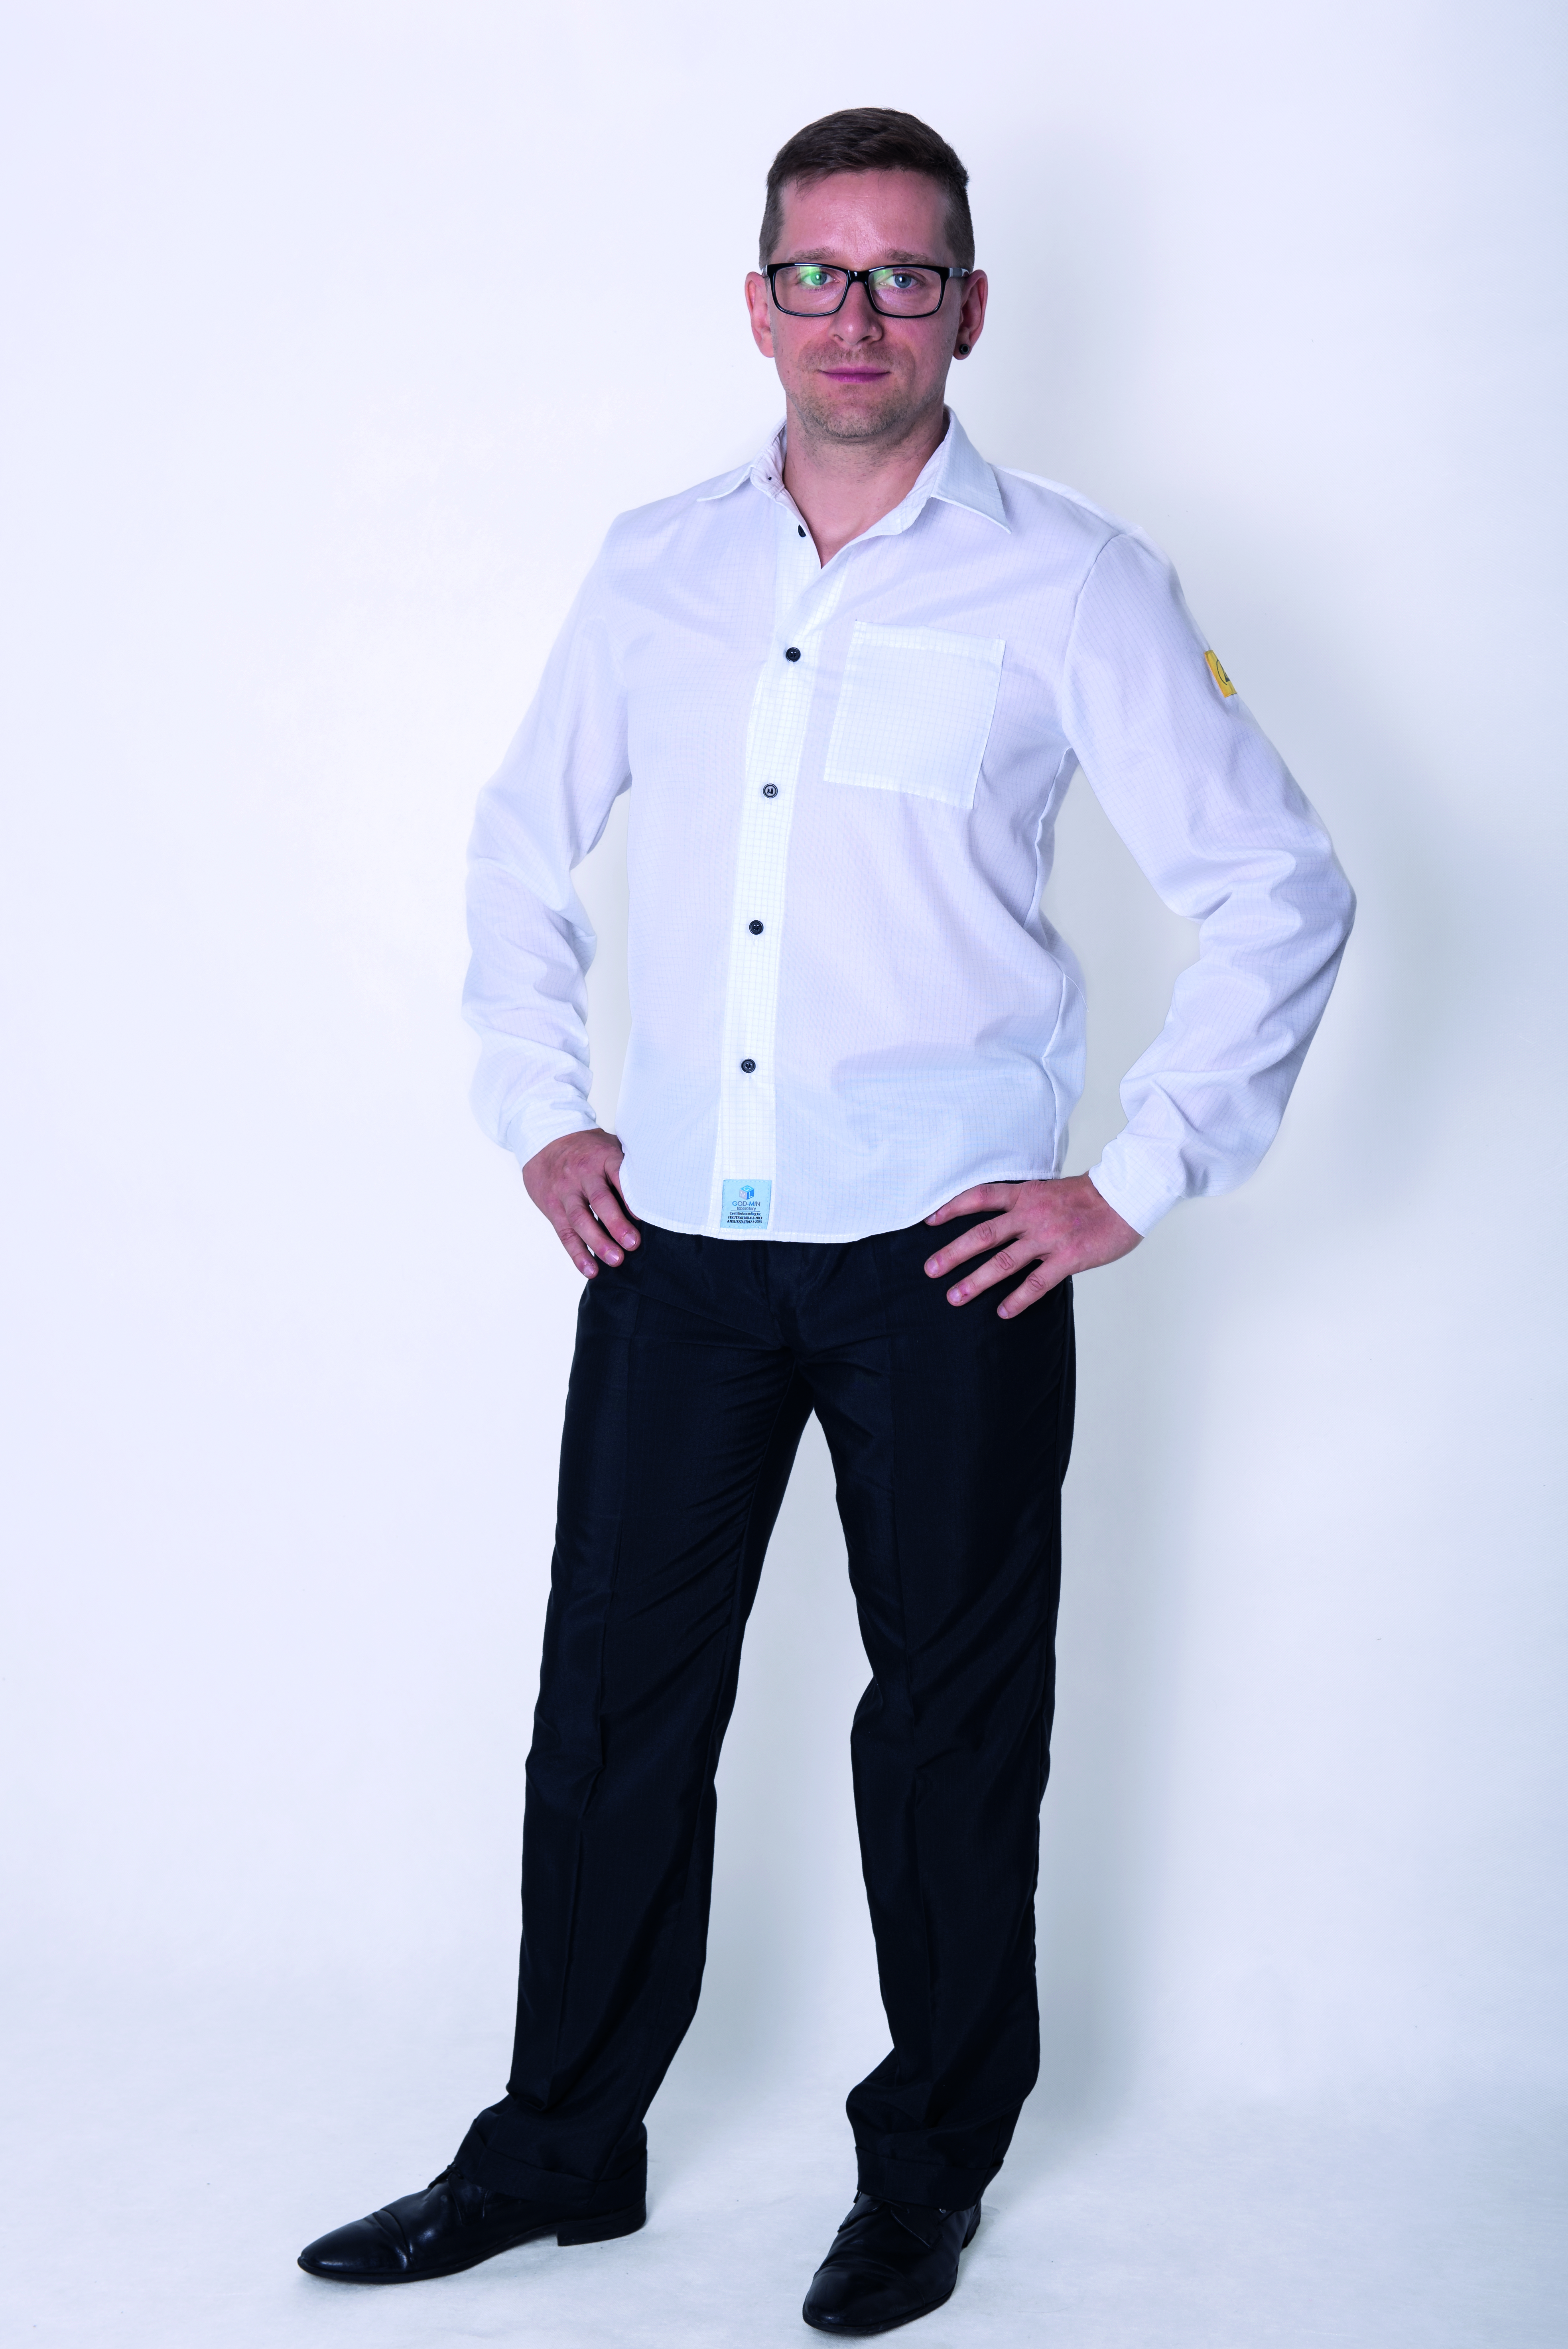 ESD Oxford Shirts Unisex Business ING White Shirts With Long Sleeves & Breast Pocket CT35 Fabric